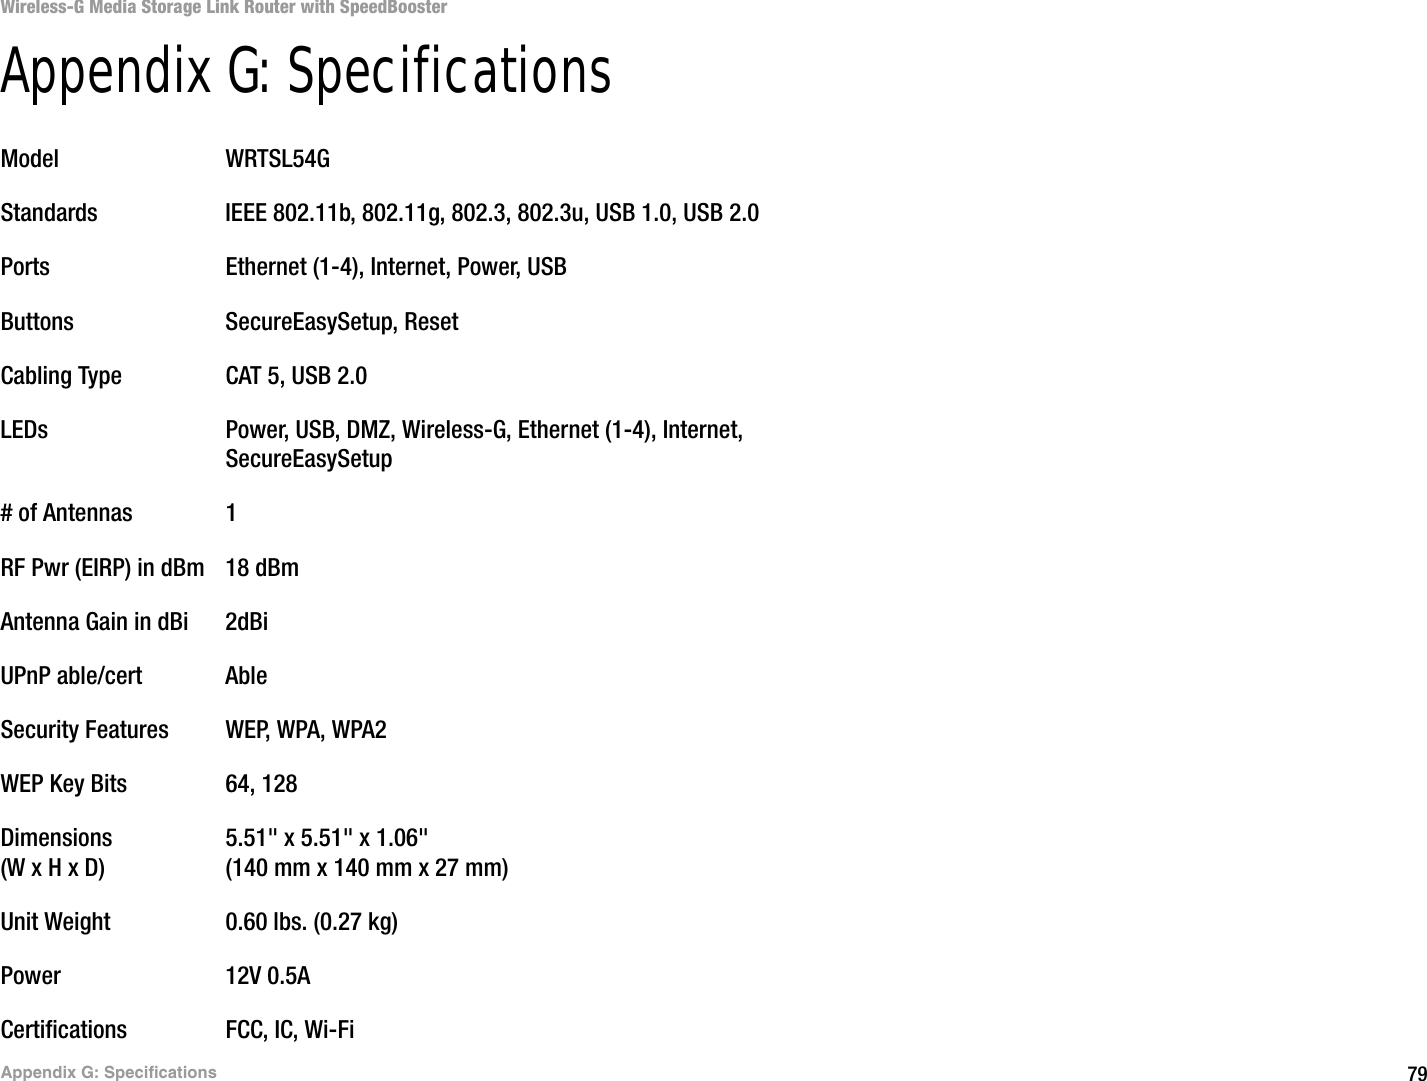 79Appendix G: SpecificationsWireless-G Media Storage Link Router with SpeedBoosterAppendix G: SpecificationsModel WRTSL54GStandards IEEE 802.11b, 802.11g, 802.3, 802.3u, USB 1.0, USB 2.0Ports Ethernet (1-4), Internet, Power, USBButtons SecureEasySetup, ResetCabling Type CAT 5, USB 2.0LEDs Power, USB, DMZ, Wireless-G, Ethernet (1-4), Internet,SecureEasySetup# of Antennas 1RF Pwr (EIRP) in dBm 18 dBmAntenna Gain in dBi 2dBiUPnP able/cert AbleSecurity Features WEP, WPA, WPA2WEP Key Bits 64, 128Dimensions 5.51&quot; x 5.51&quot; x 1.06&quot;(W x H x D) (140 mm x 140 mm x 27 mm)Unit Weight 0.60 lbs. (0.27 kg)Power 12V 0.5ACertifications FCC, IC, Wi-Fi